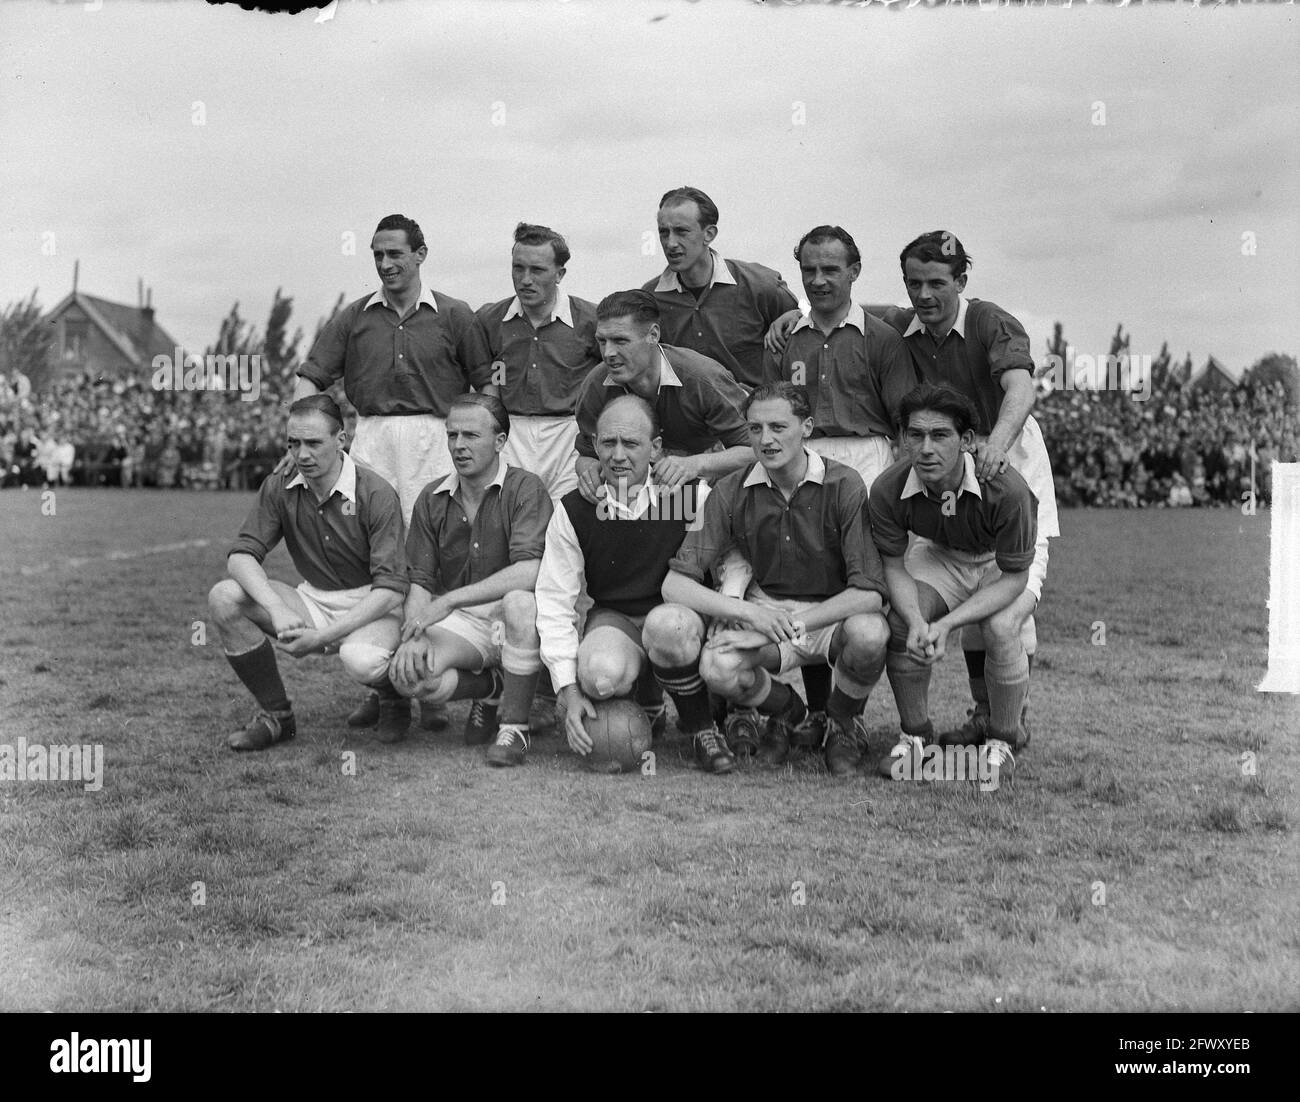 Promotion ZFC-Sparta 0-1 ZF team, May 8, 1949, PROMOTIONS, sports, soccer, The Netherlands, 20th century press agency photo, news to remember, documen Stock Photo